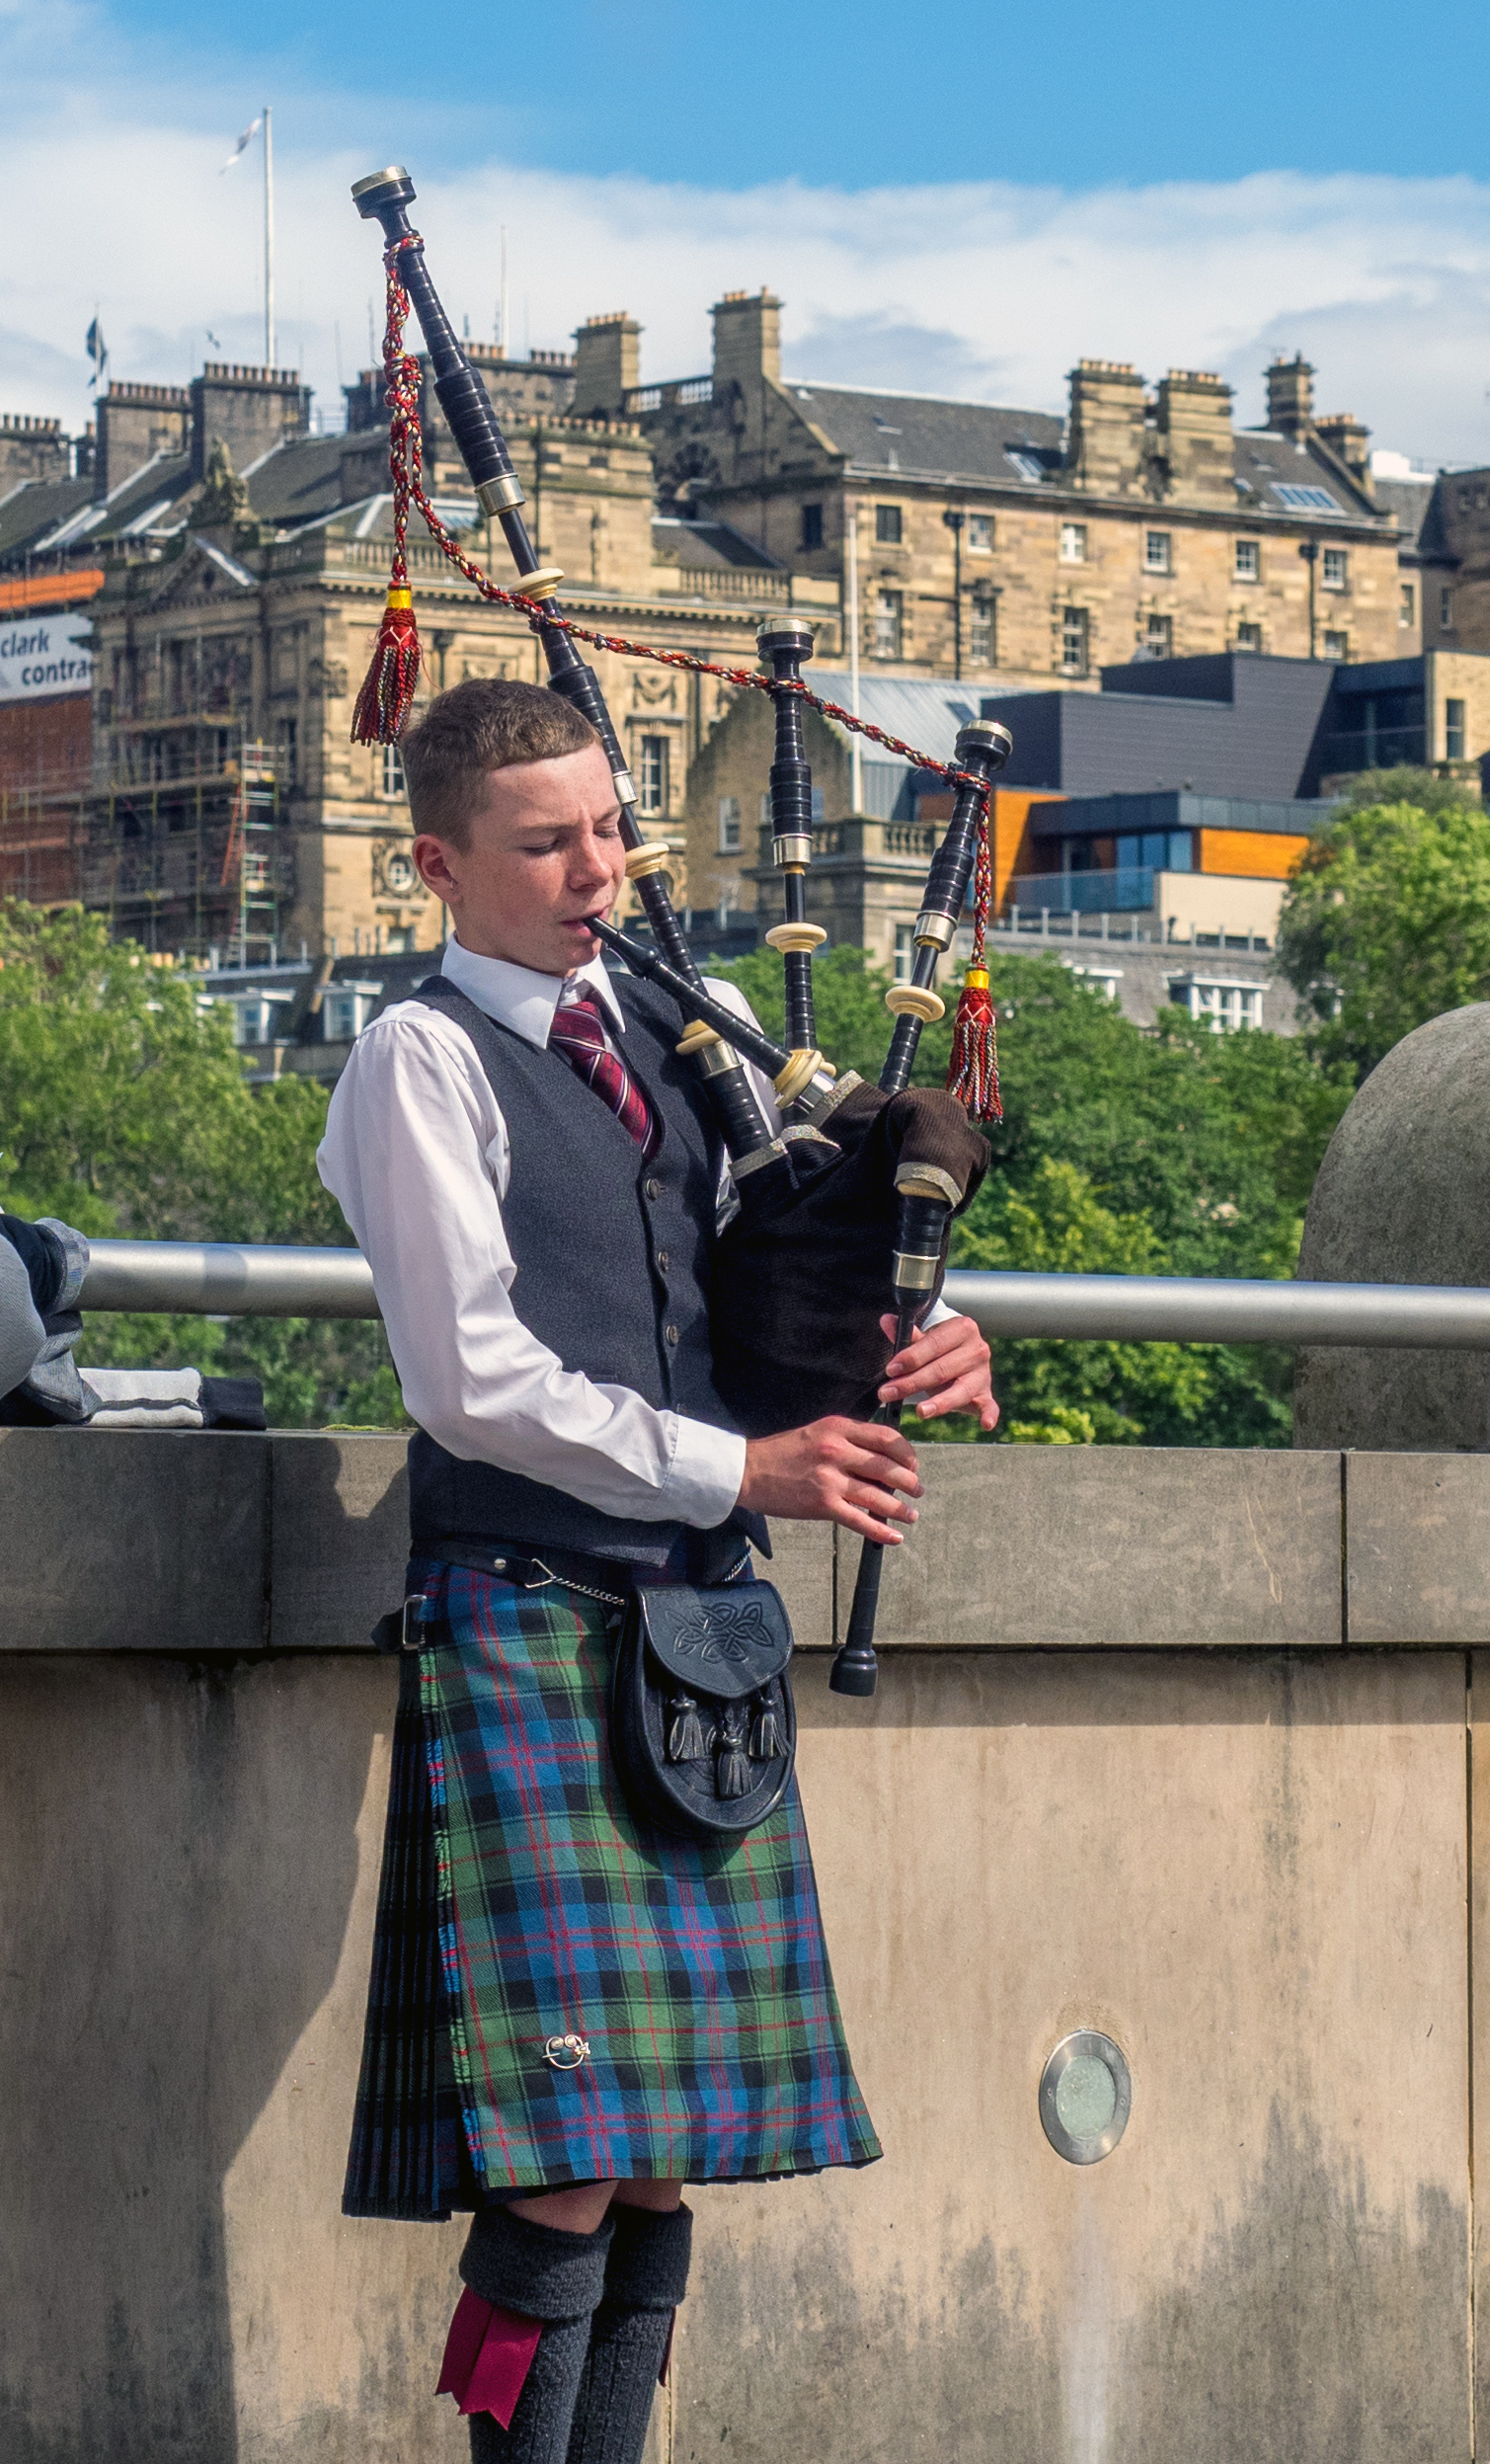 Edinburgh, UK - July 26, 2017: Unidentified Bagpiper playing music with bagpipes along the Mound on July 26, 2017 in Edinburgh Scotland. There are many bagpipers busking and entertaining tourists!